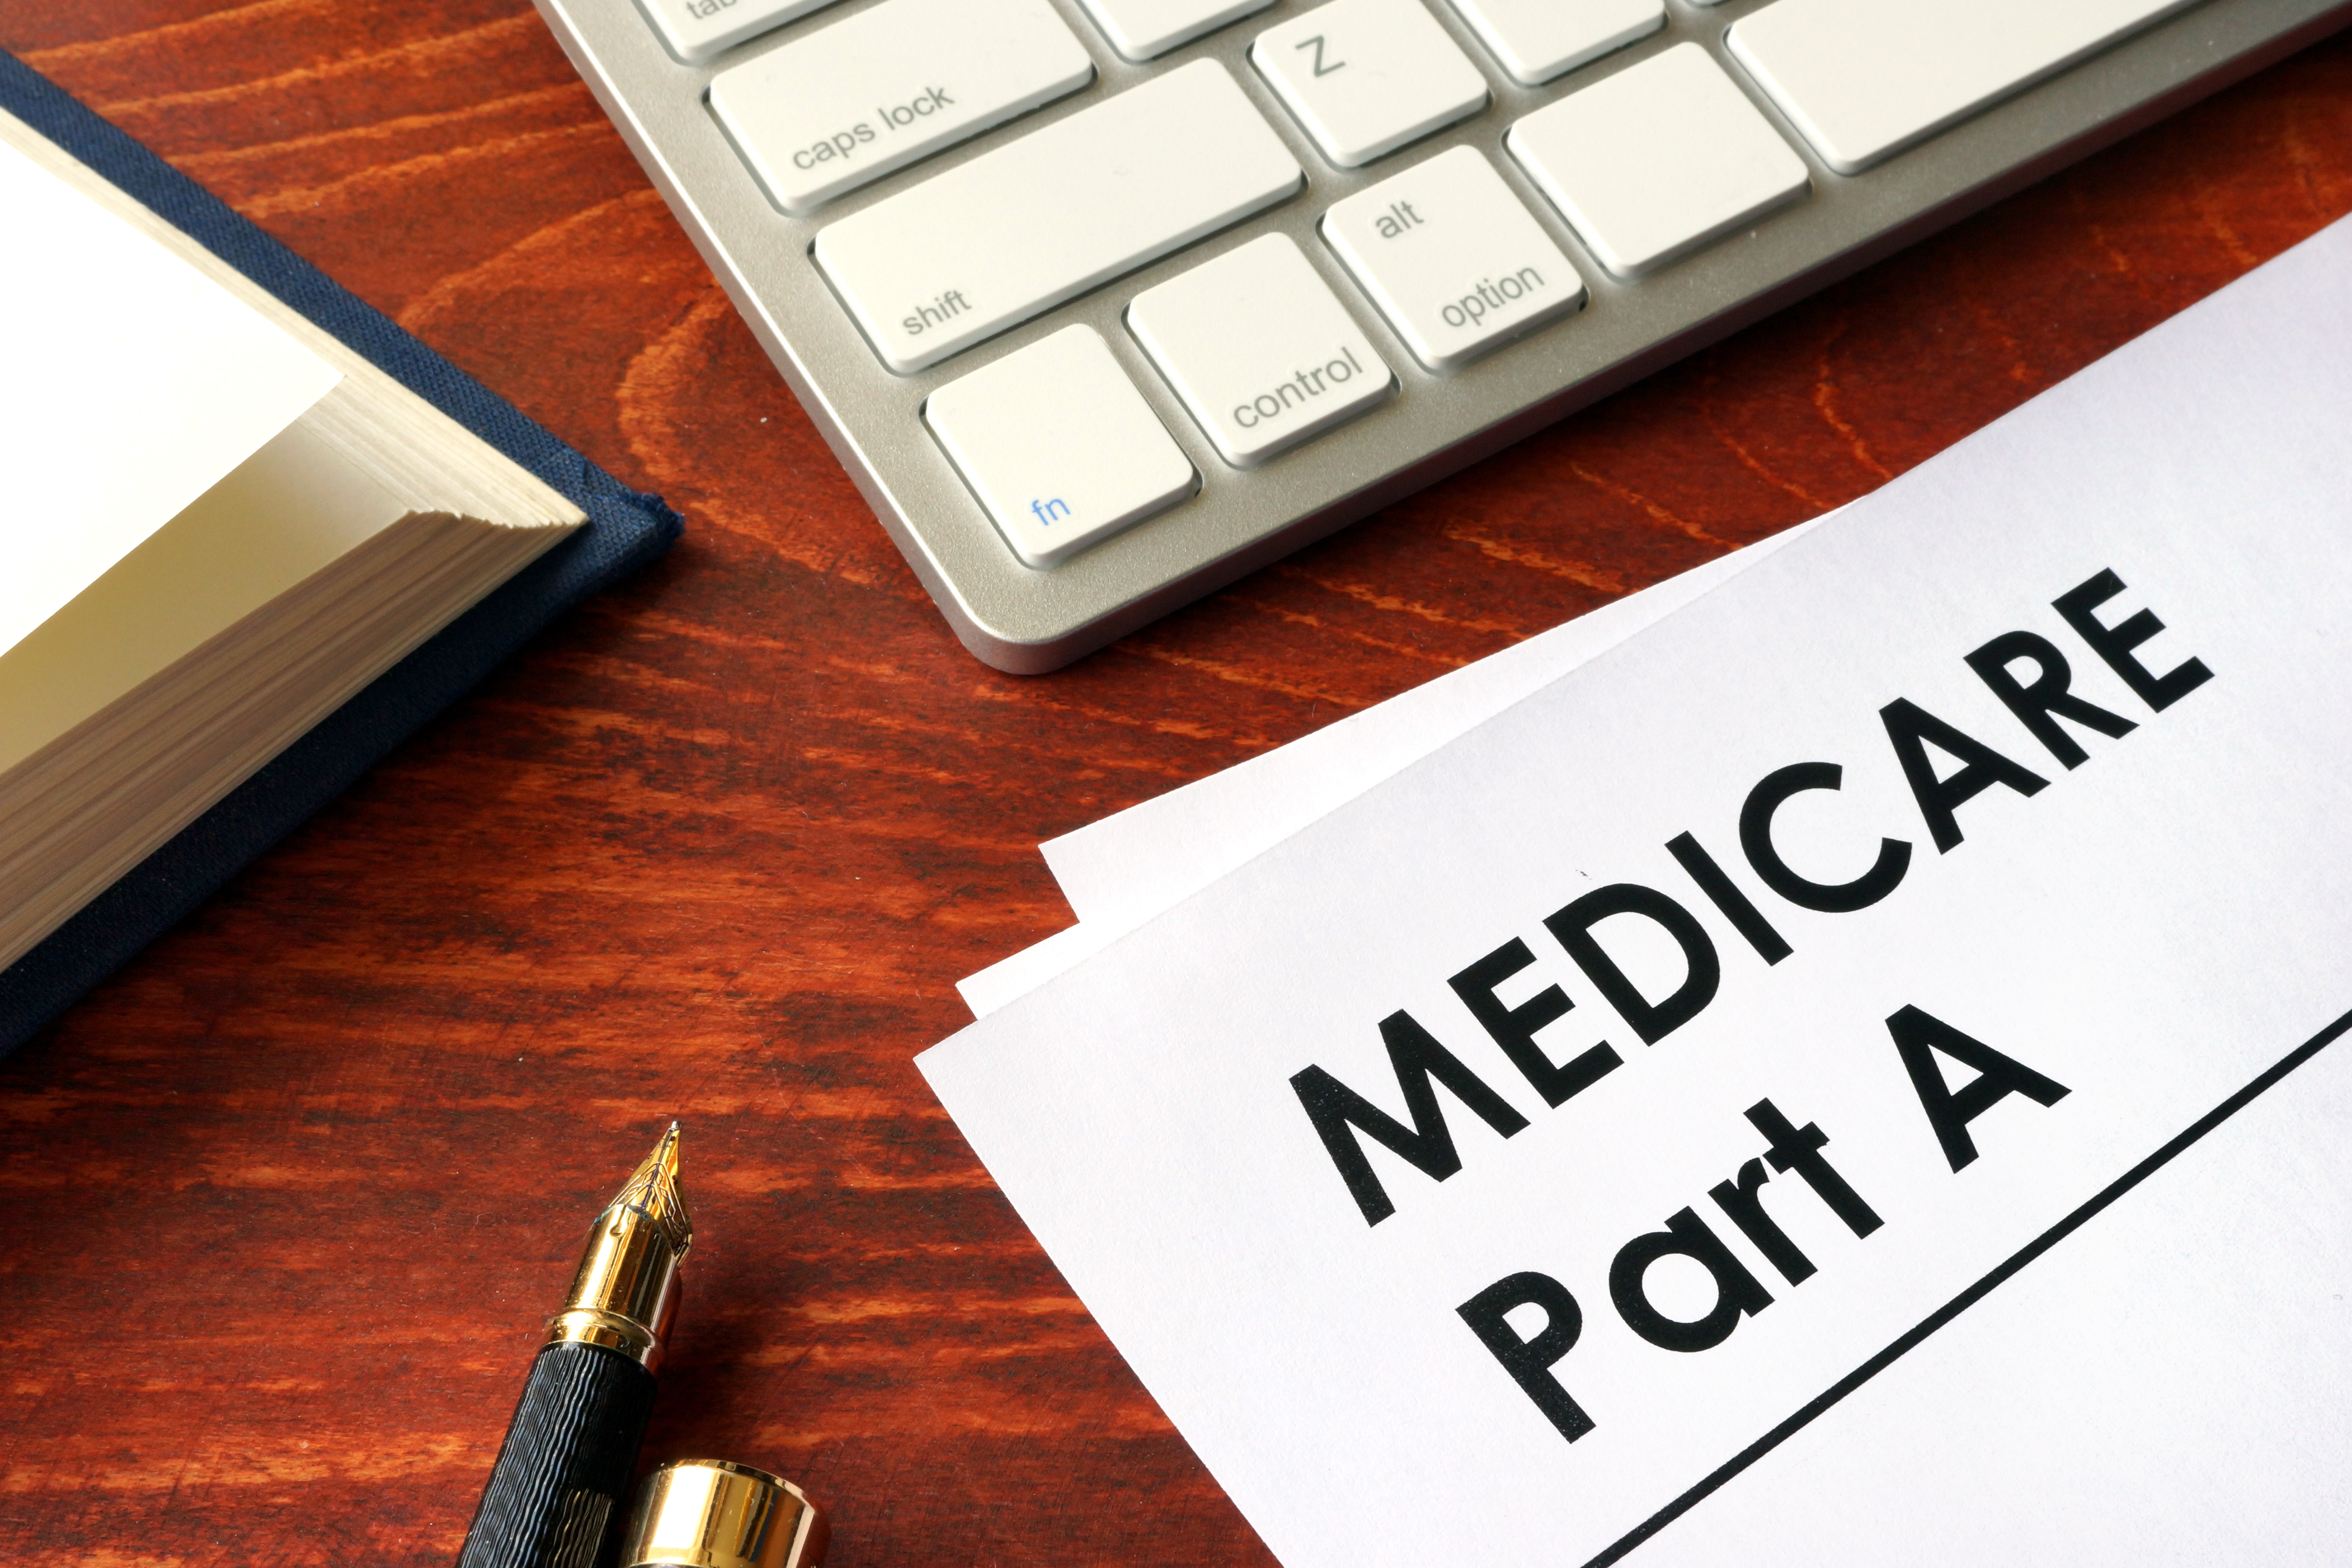 medicare-part-a-title-on-document